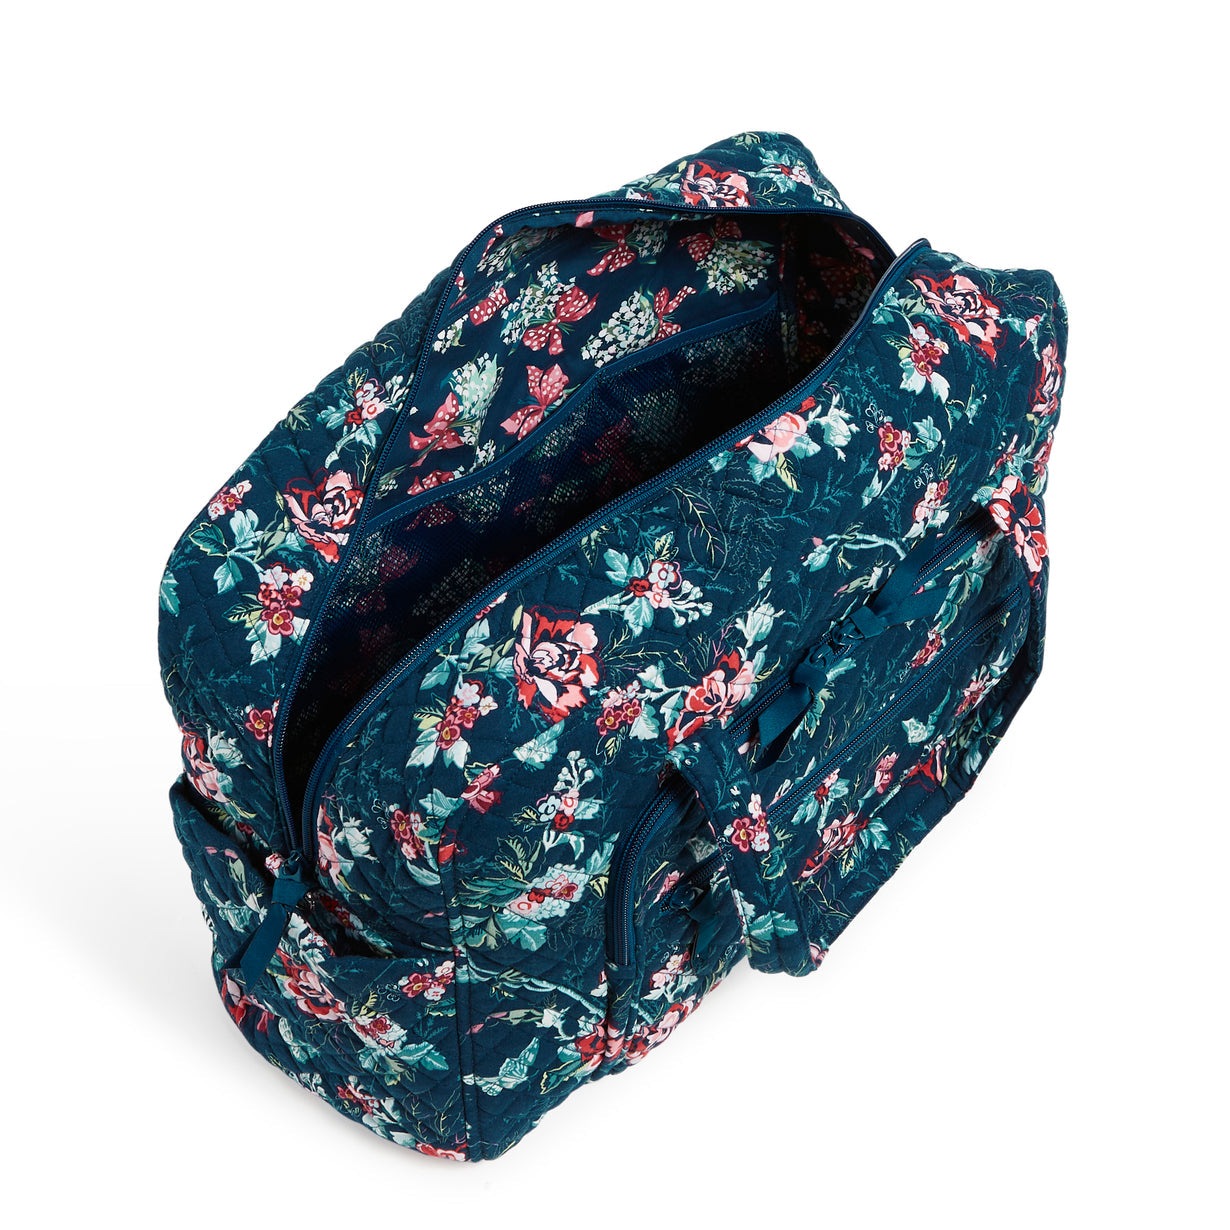 Unzipped main pocket for travel bag in Rose Toile pattern